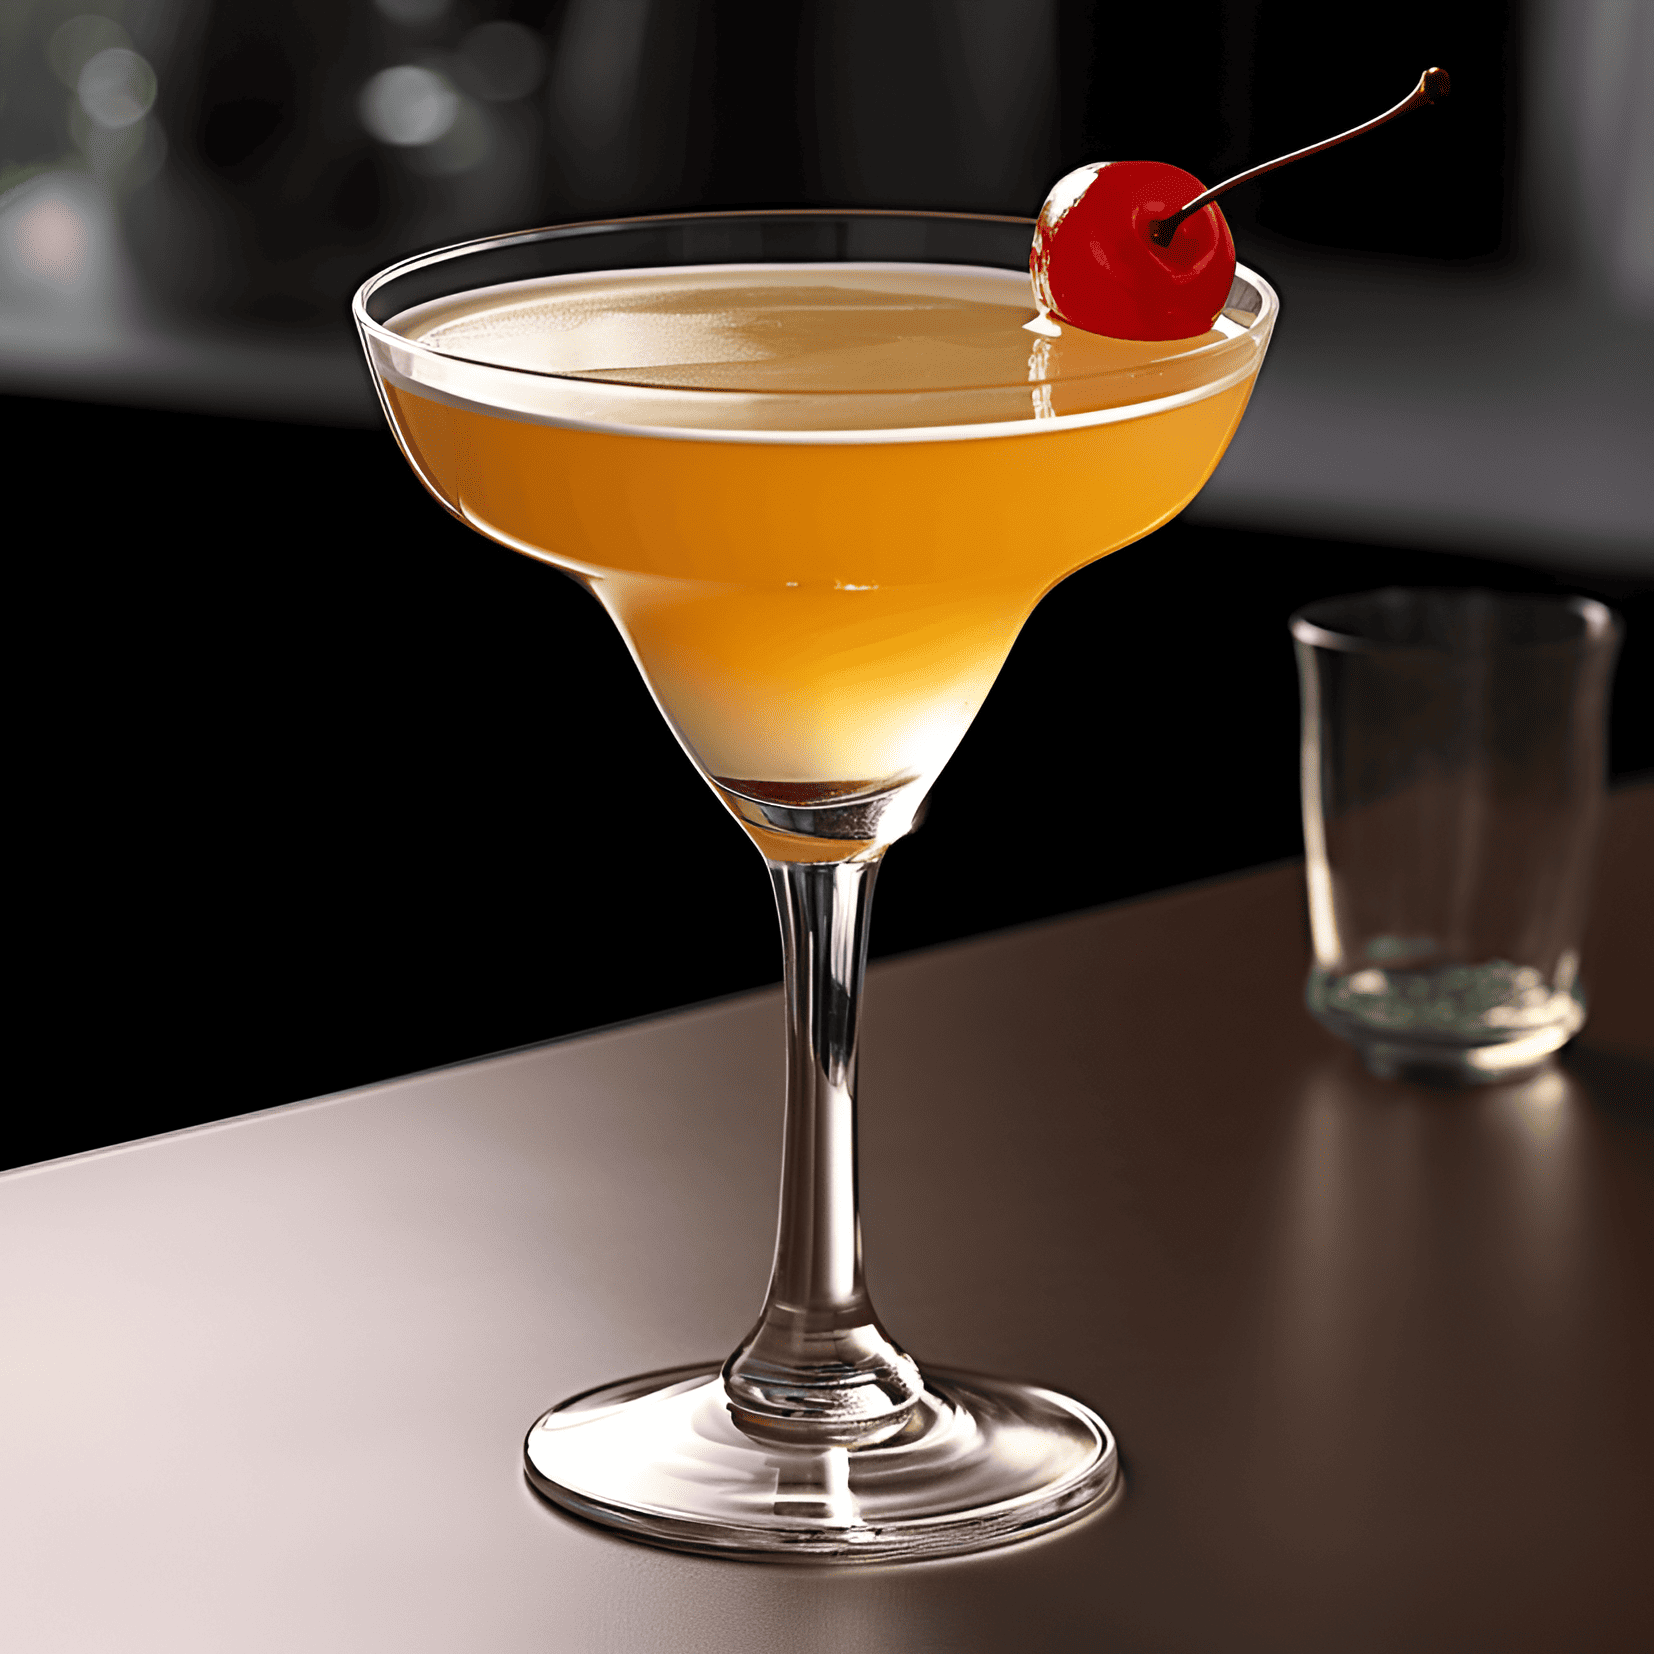 Havana Cocktail Recipe - The Havana cocktail is a delightful mix of sweet, sour, and fruity flavors. The rum adds a rich, smooth base while the pineapple juice and lime juice provide a refreshing tanginess. The grenadine adds a touch of sweetness to balance the tartness of the citrus.